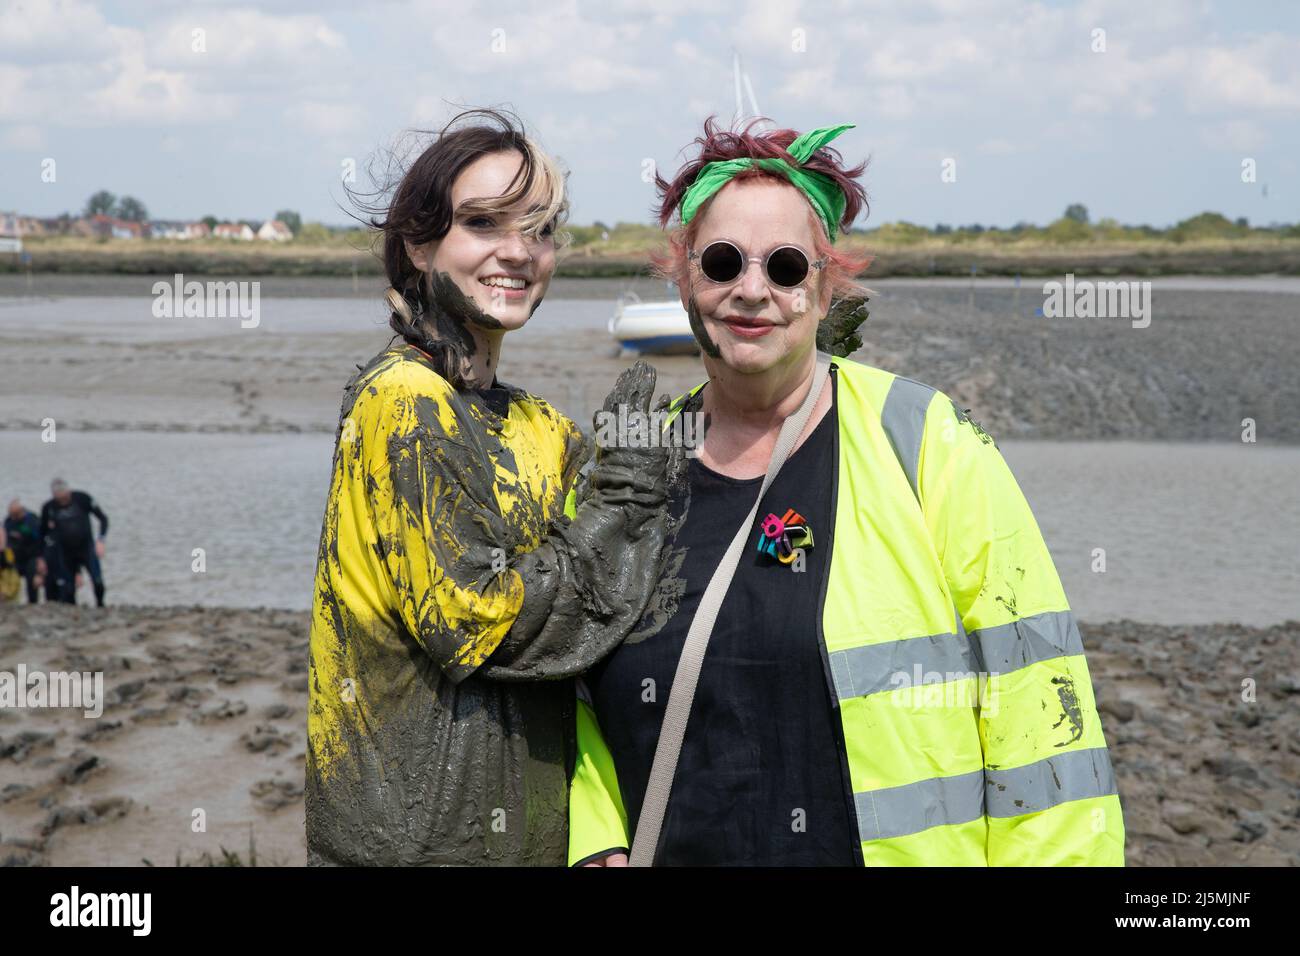 Jo Brand and her daughter Maisi take part in the Maldon Mud Race in Maldon, Essex as the race returns for the first time in two years. The Maldon Mud Race is an annual fun race held in spring (originally in the winter, now in late April or early May) at Promenade Park in Maldon, Essex, England, in which entrants compete to complete a 500 metres (550 yd) dash, in thick mud, over the bed of the River Blackwater. The race is organised by the Lions & Rotary clubs of Maldon and Maldon District Council which raises money for charity. Stock Photo